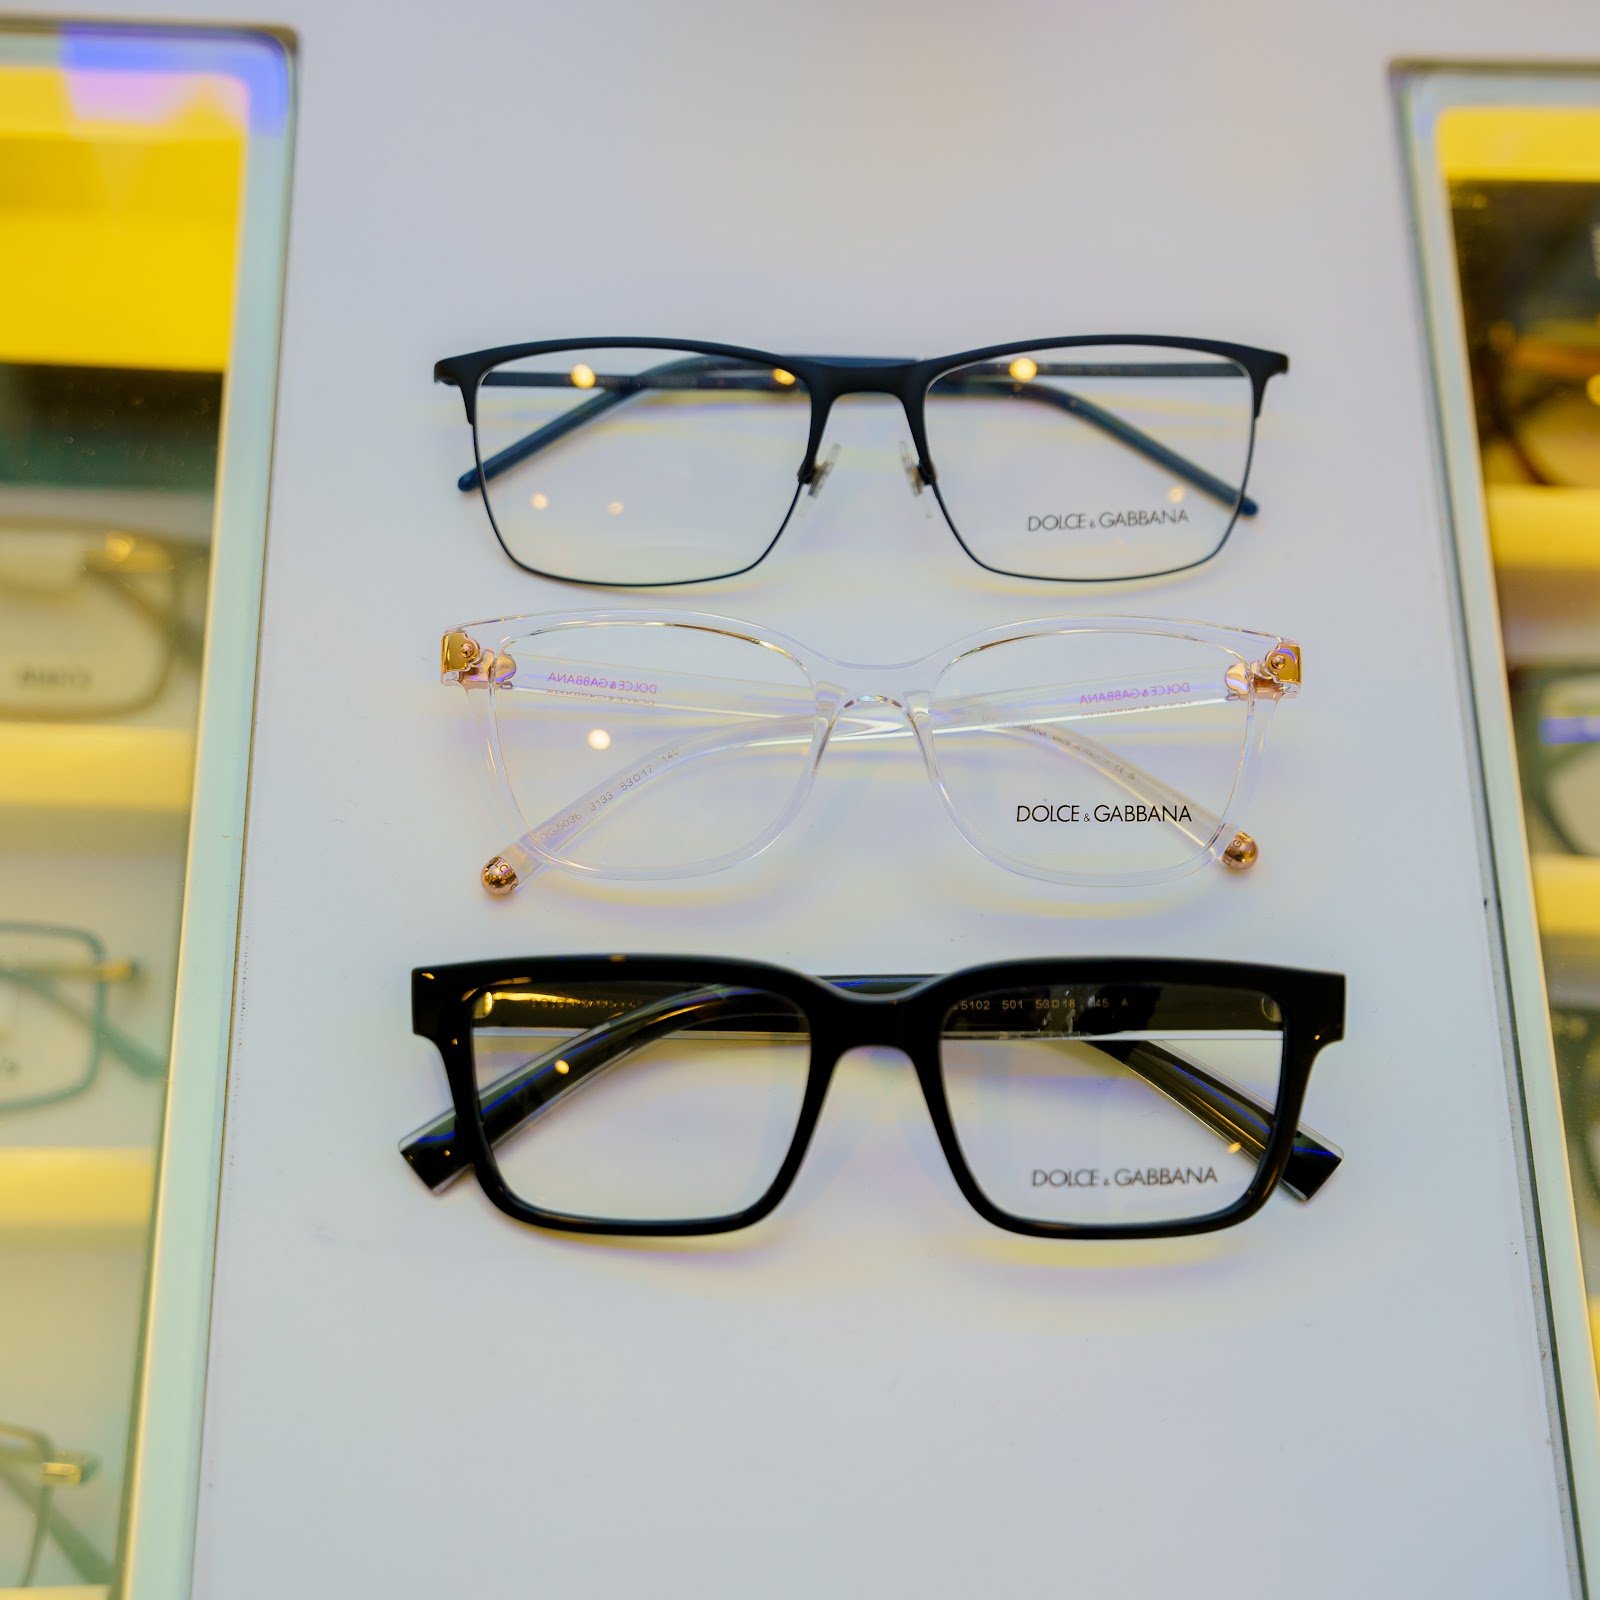 Finding the perfect pair is clearer than ever. 🤓✨ @dolcegabbana  frames that speak 'fashion-forward' in every language.

#optical #eyewear #sunglasses #glasses #eyeglasses #fashion #eyewearfashion #optician #style #optometrist #icontactoptometrist #